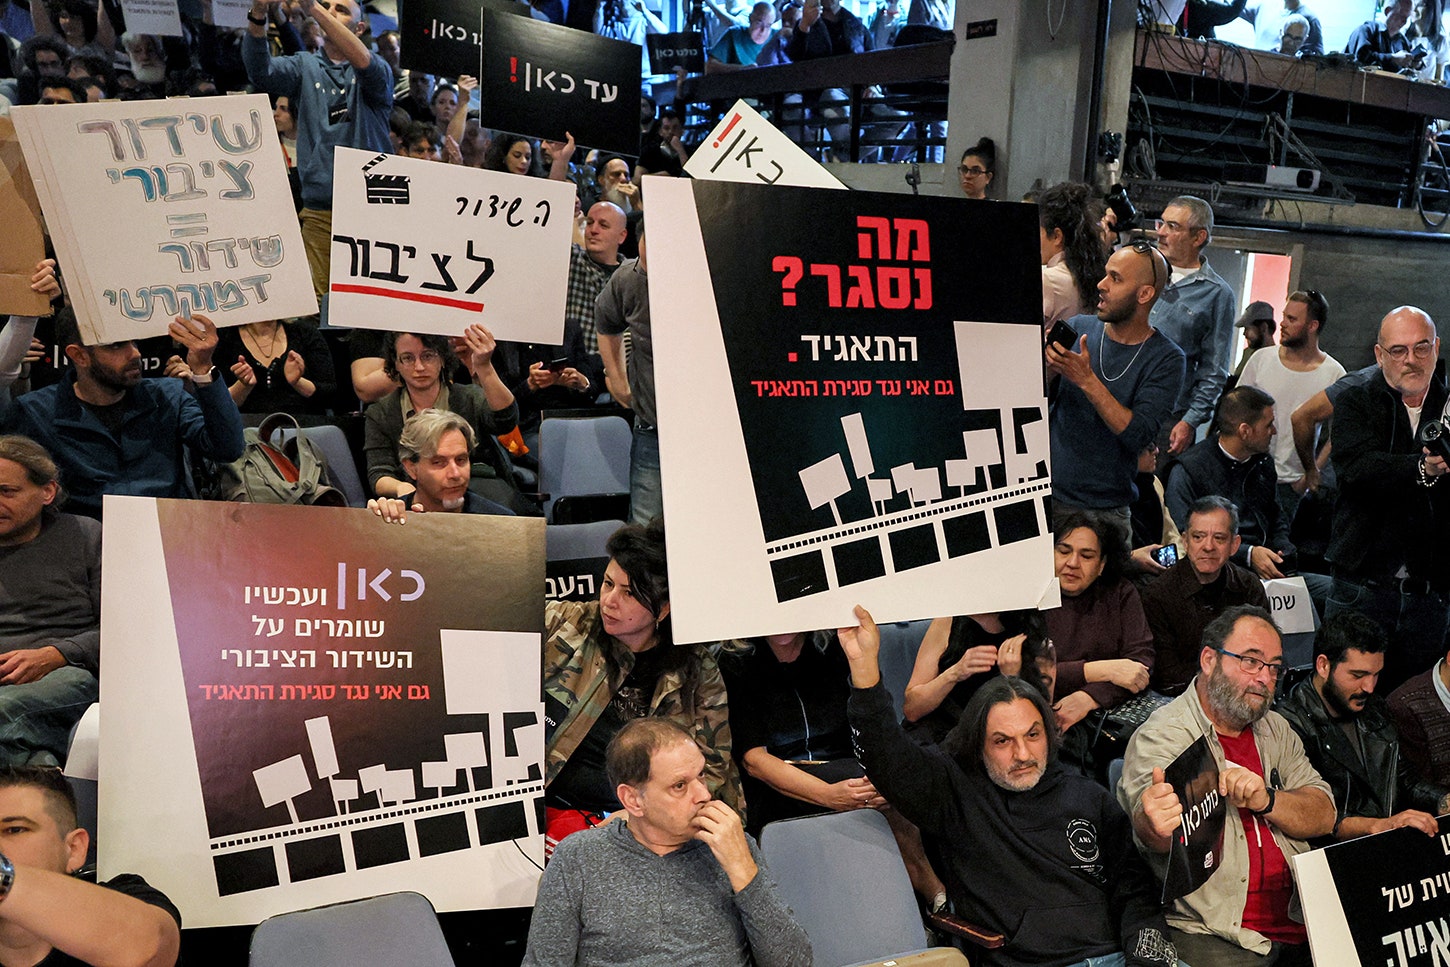 A group of people protest holding signs in Hebrew.